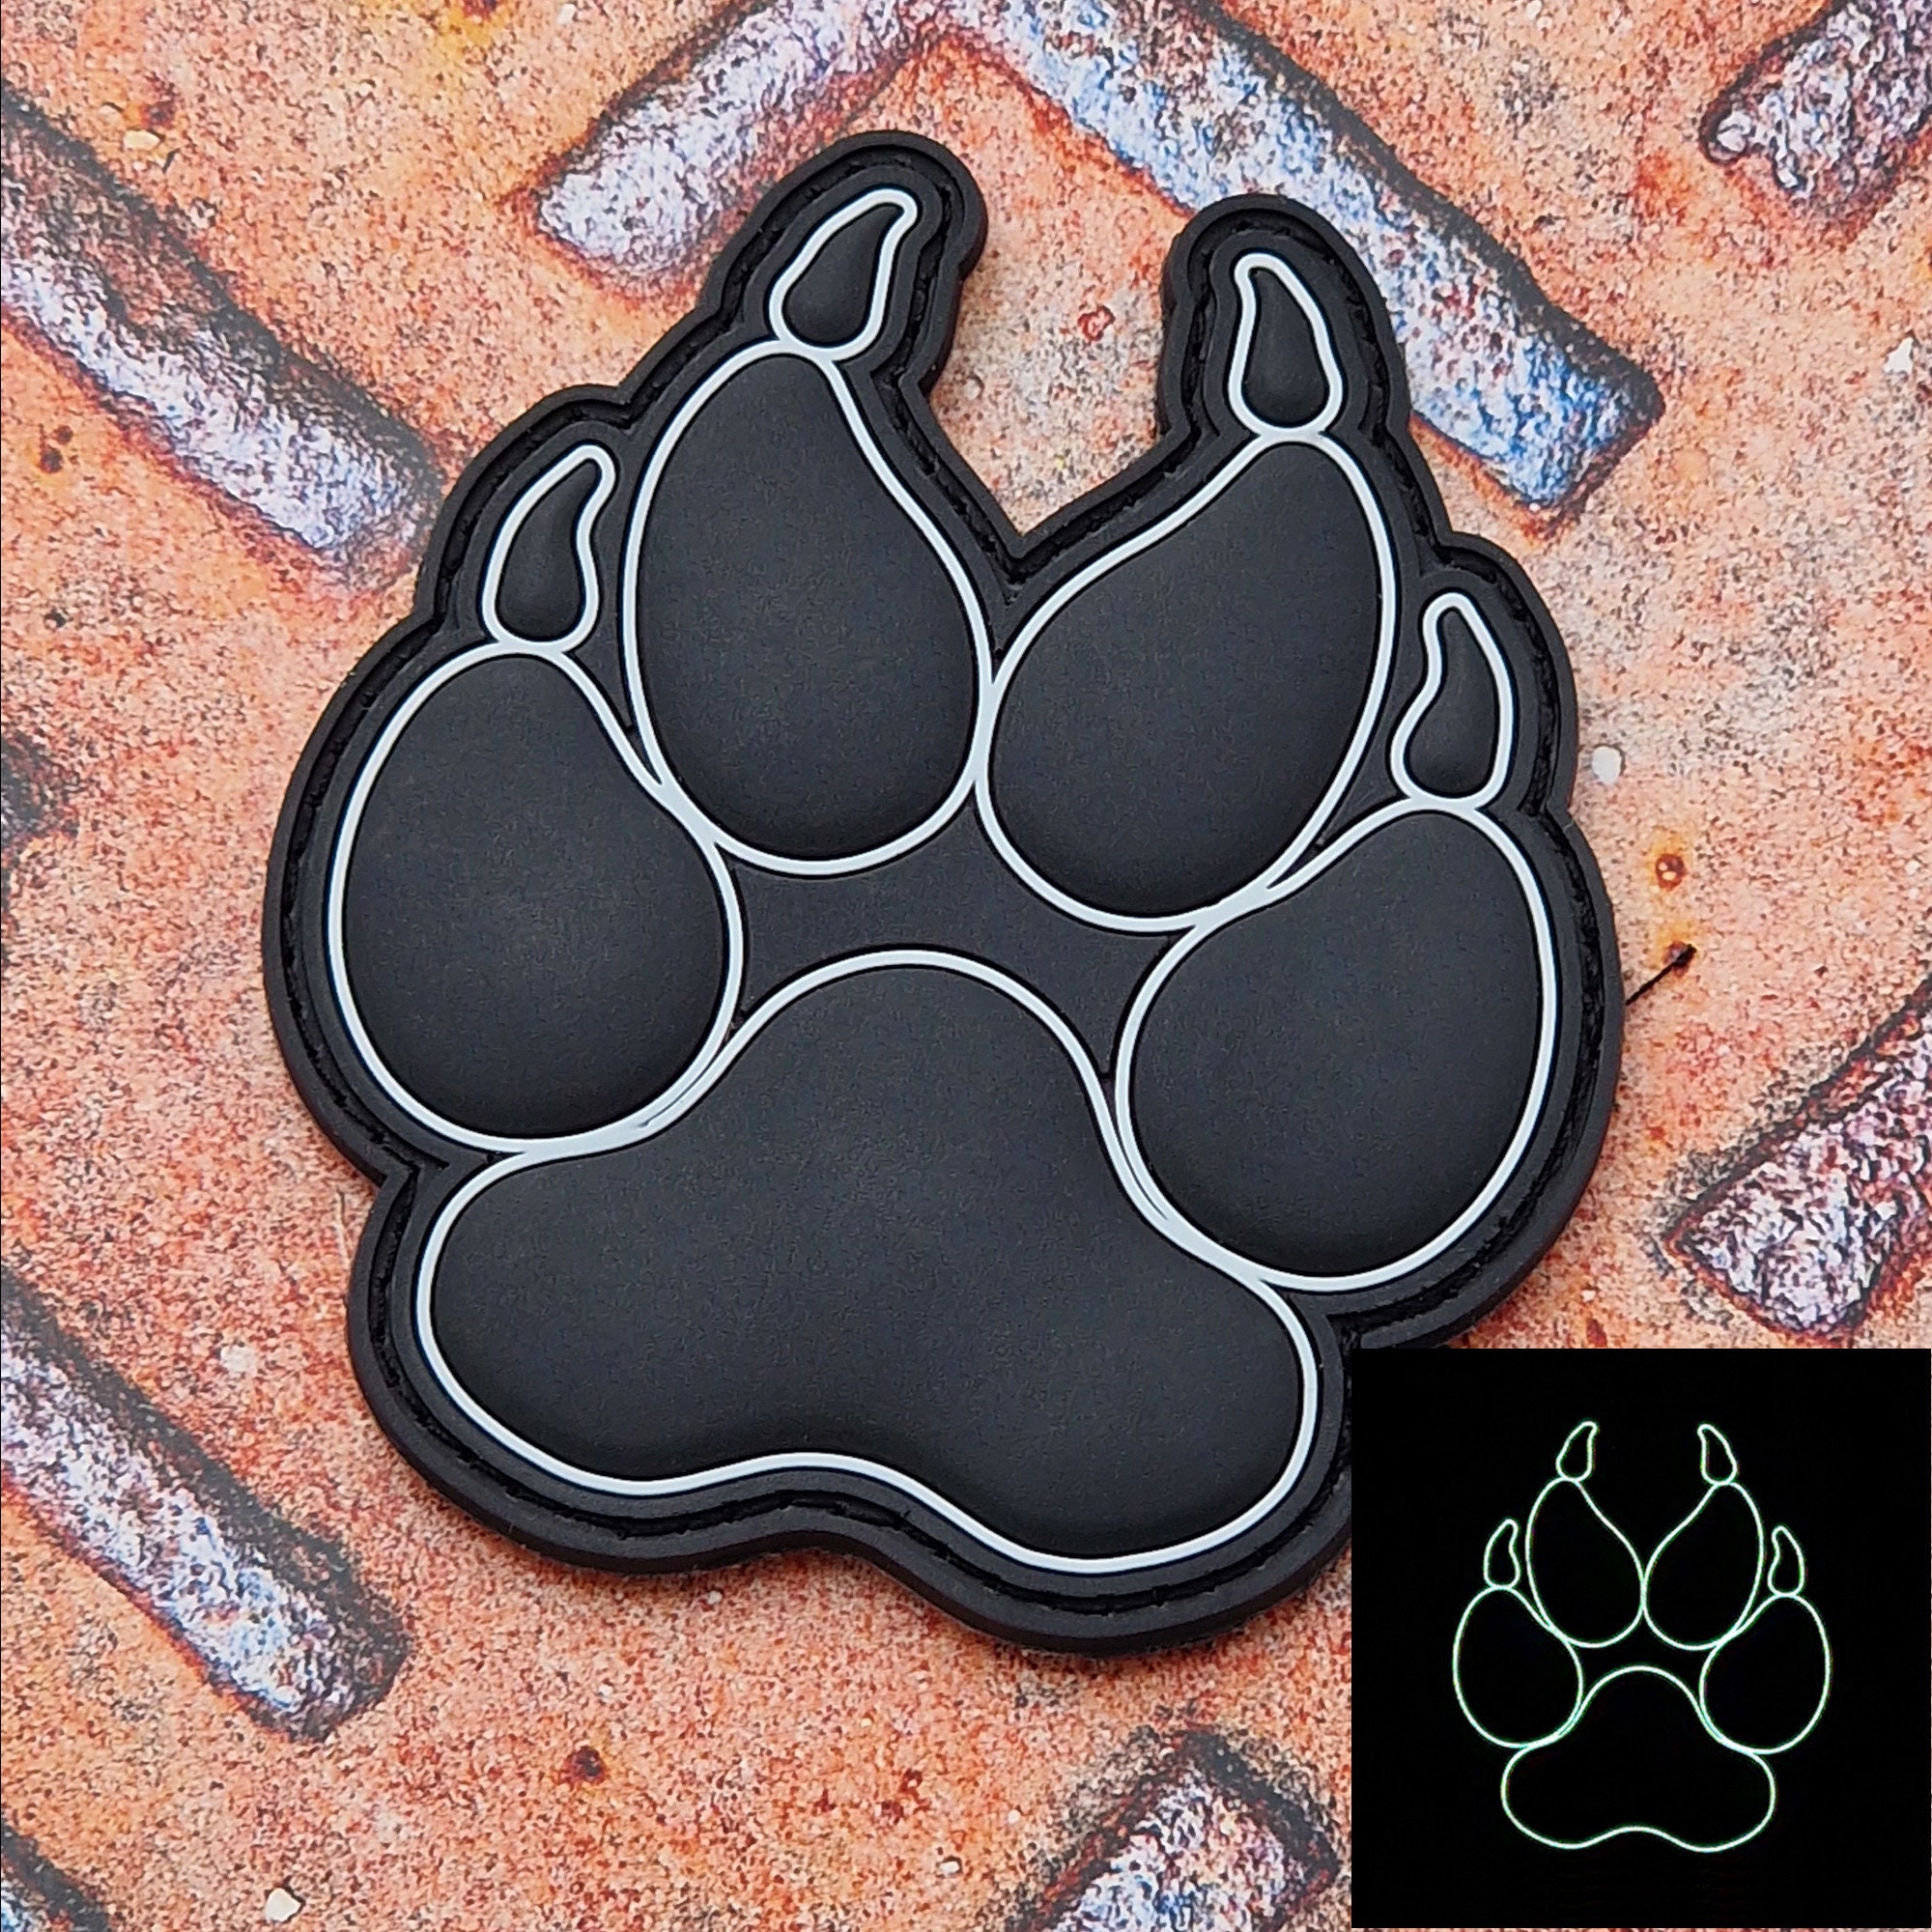 K9 K-9 PAW WOLF TRACKER Velcro Morale Tactical Patches 2